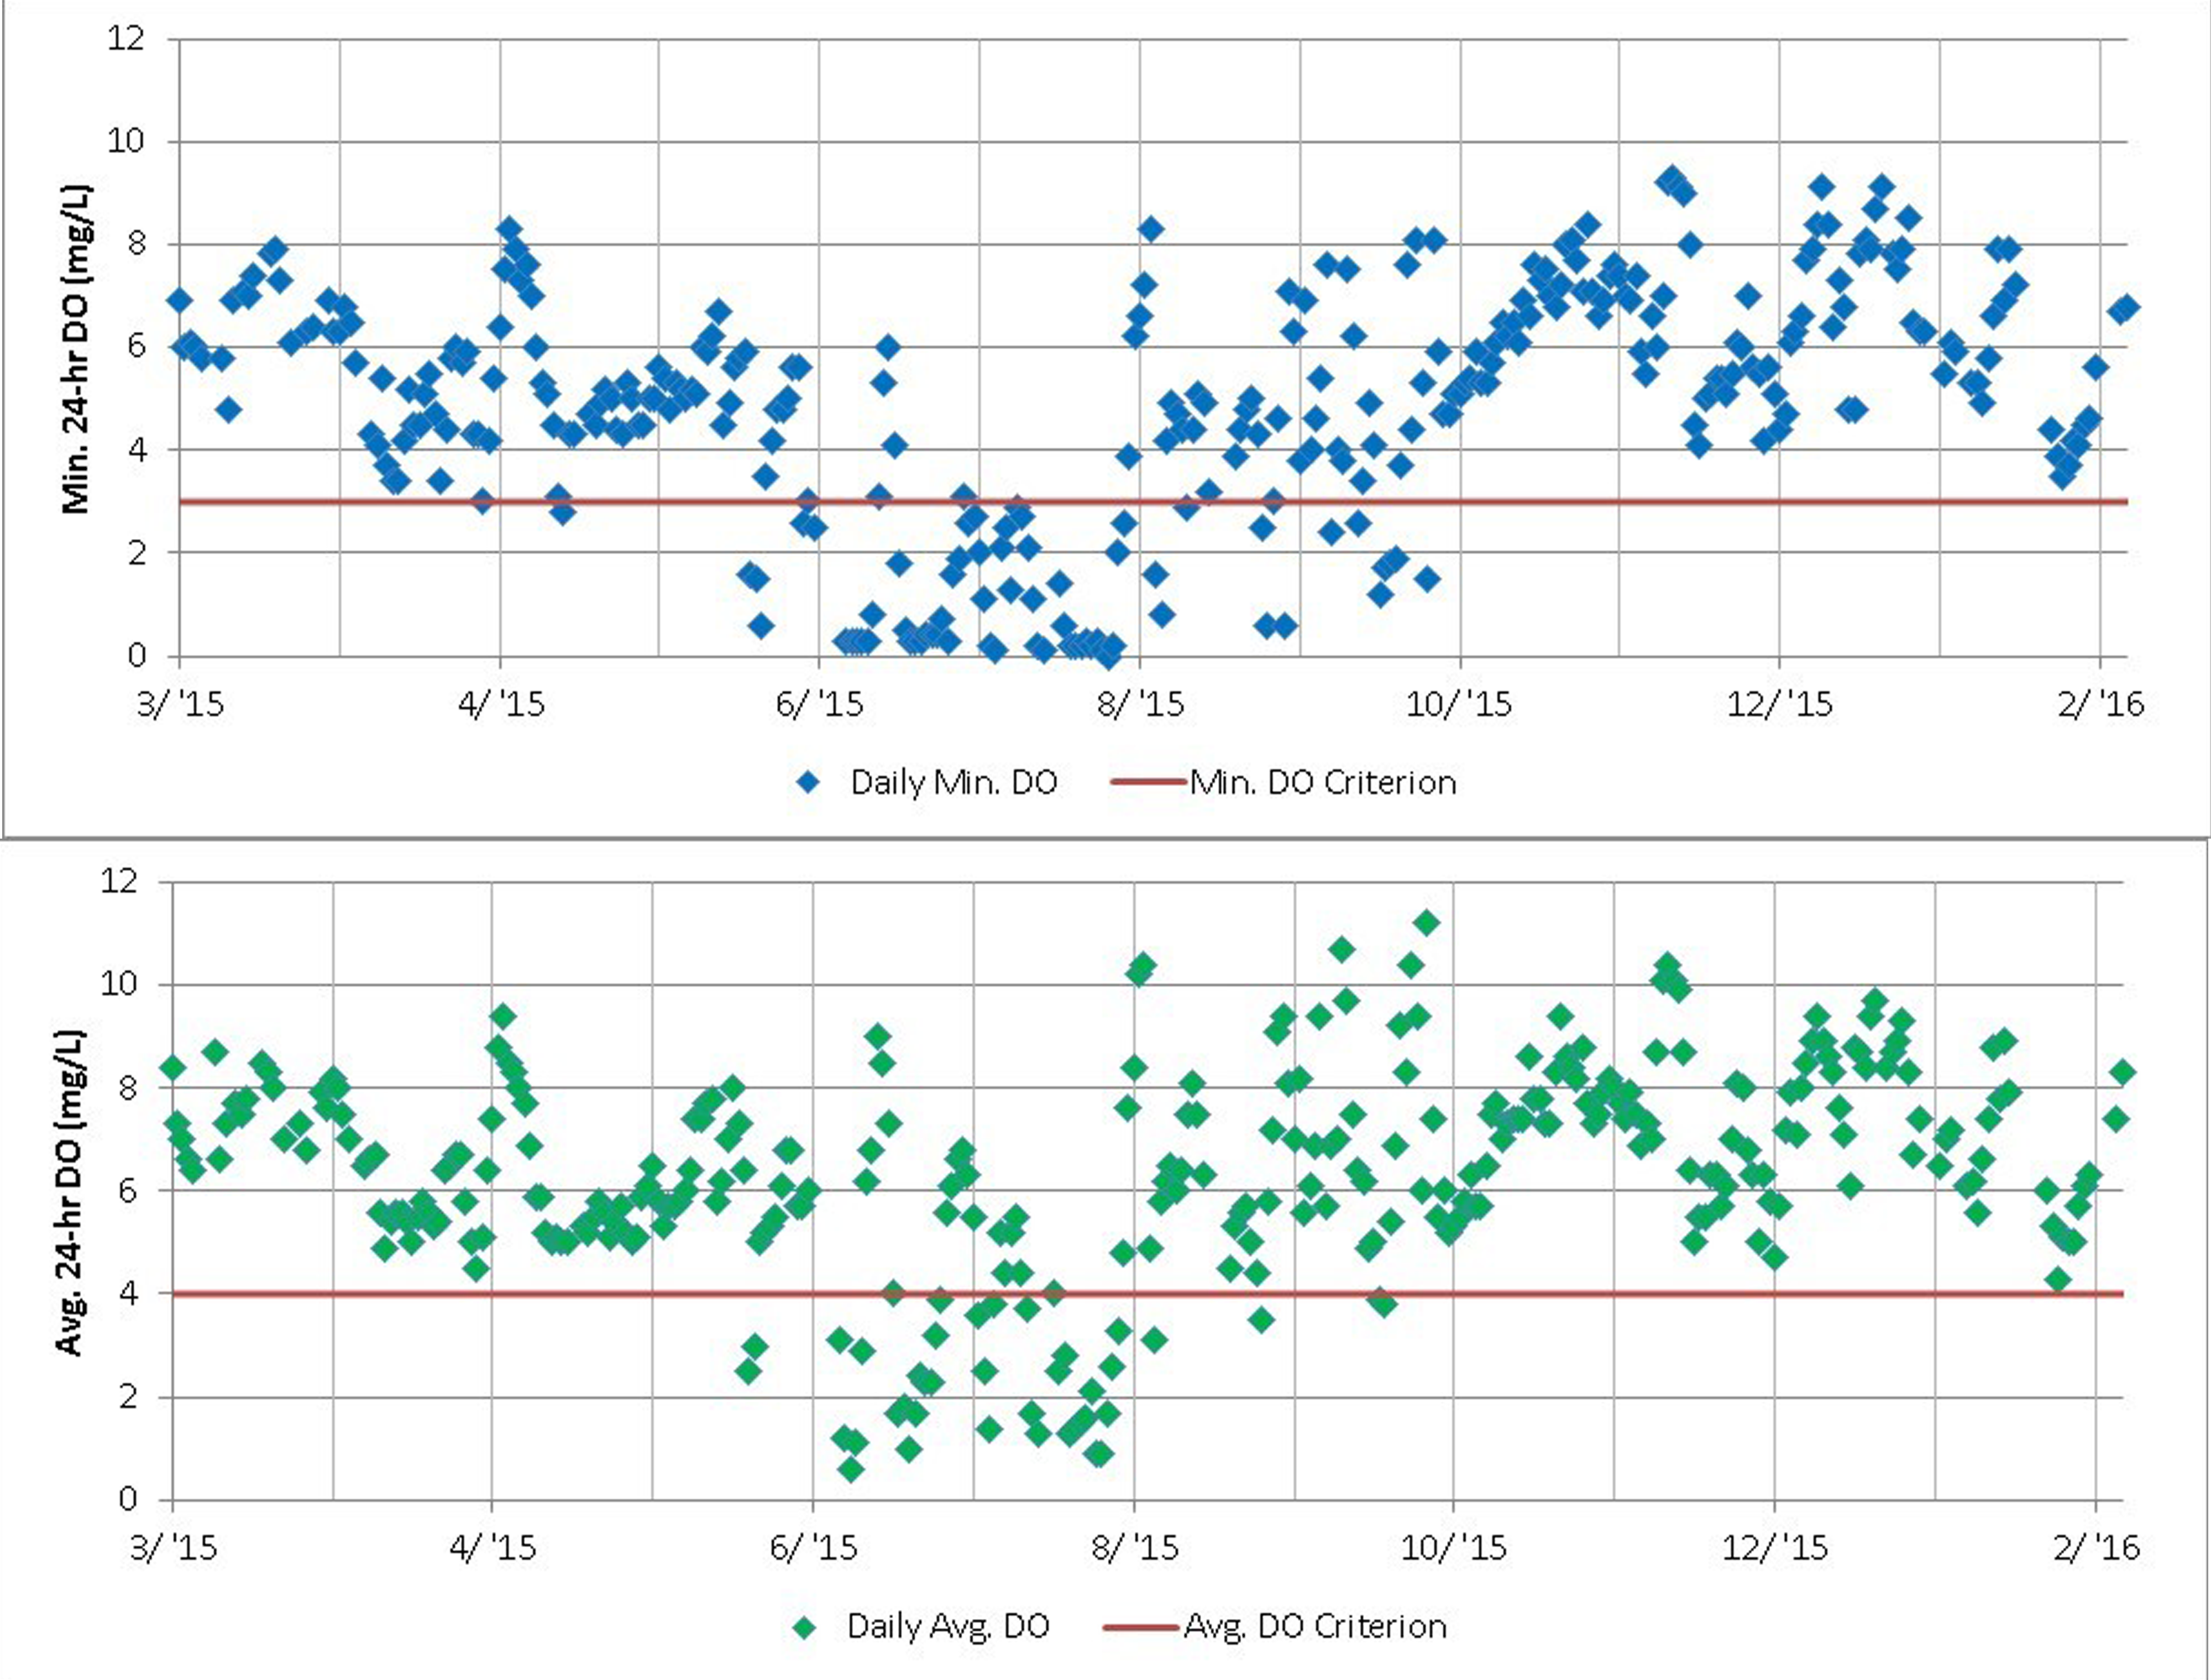 Figure 4.3. Time series of daily minimum DO and daily average DO at the USGS station on Arroyo Colorado Tidal at FM 106, Rio Hondo, TX for the period of March 1, 2015 – February 29, 2016